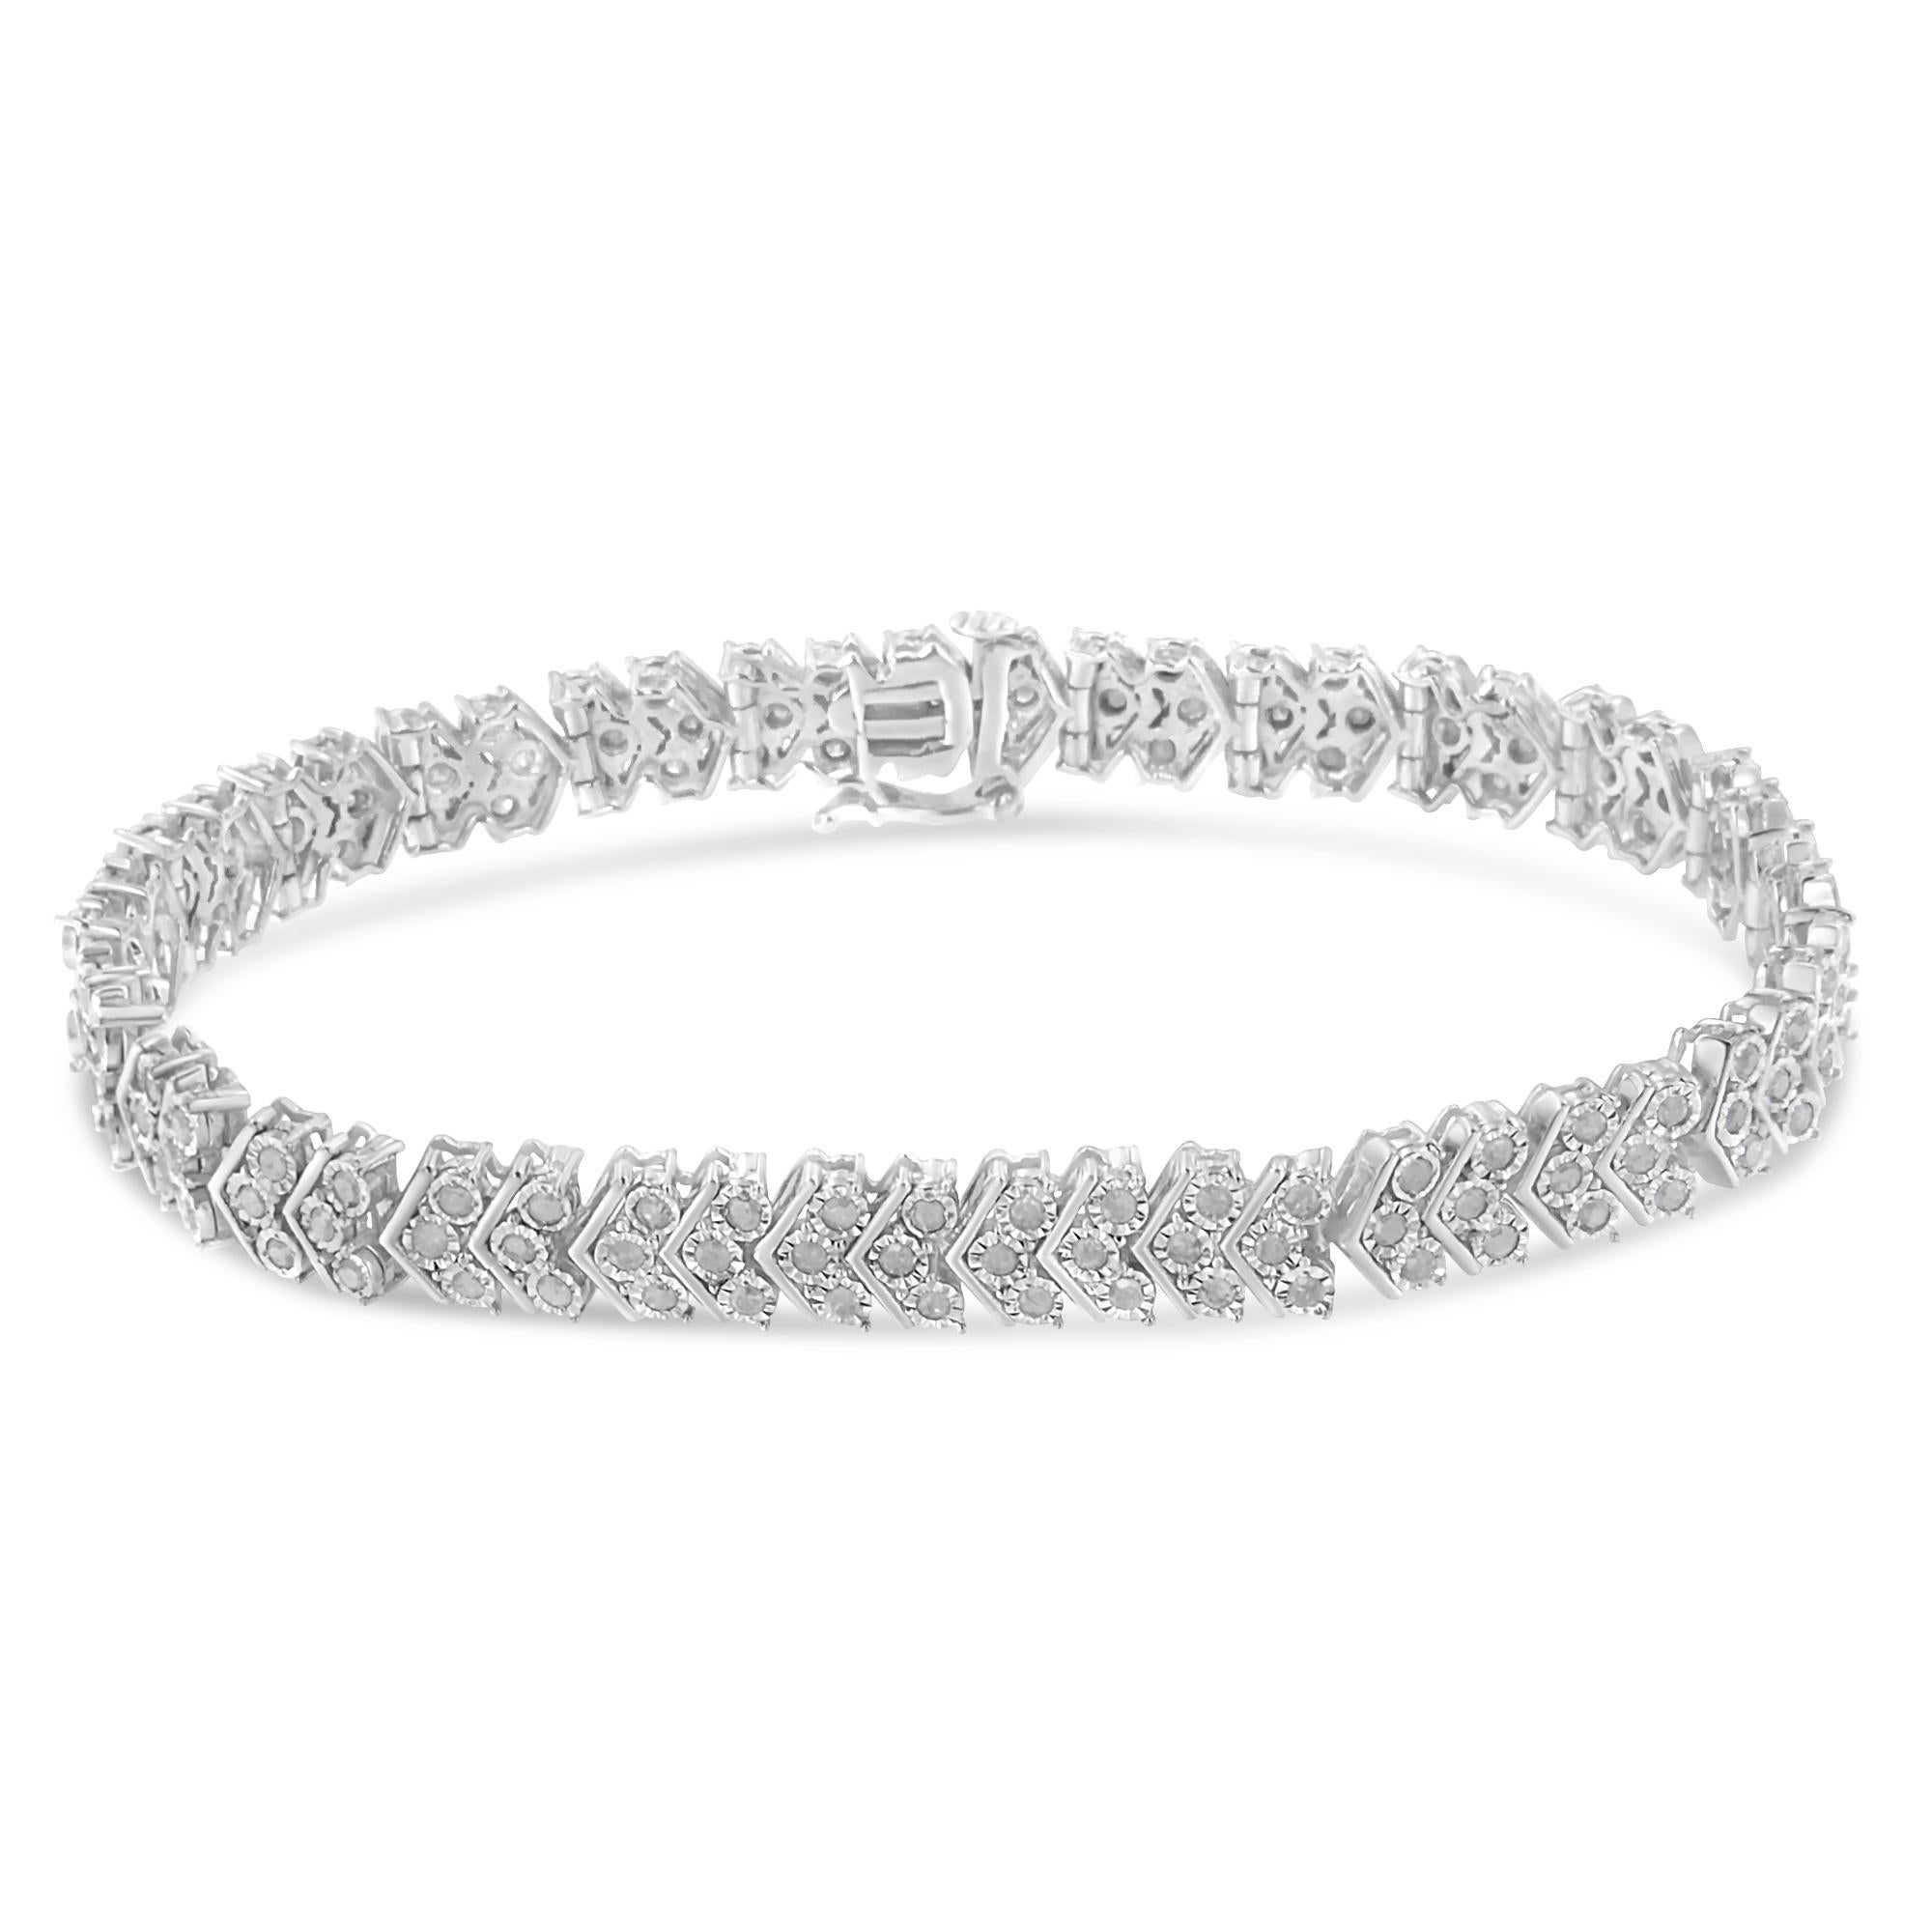 This stunning sterling silver bracelet showcases a hundred and fifty sparkling, promo quality, rose cut diamonds. The 2 1/6ct TDW of diamonds inlay the bracelets distinctive chevron pattern design. The bracelet is secured by a box clasp. Promo